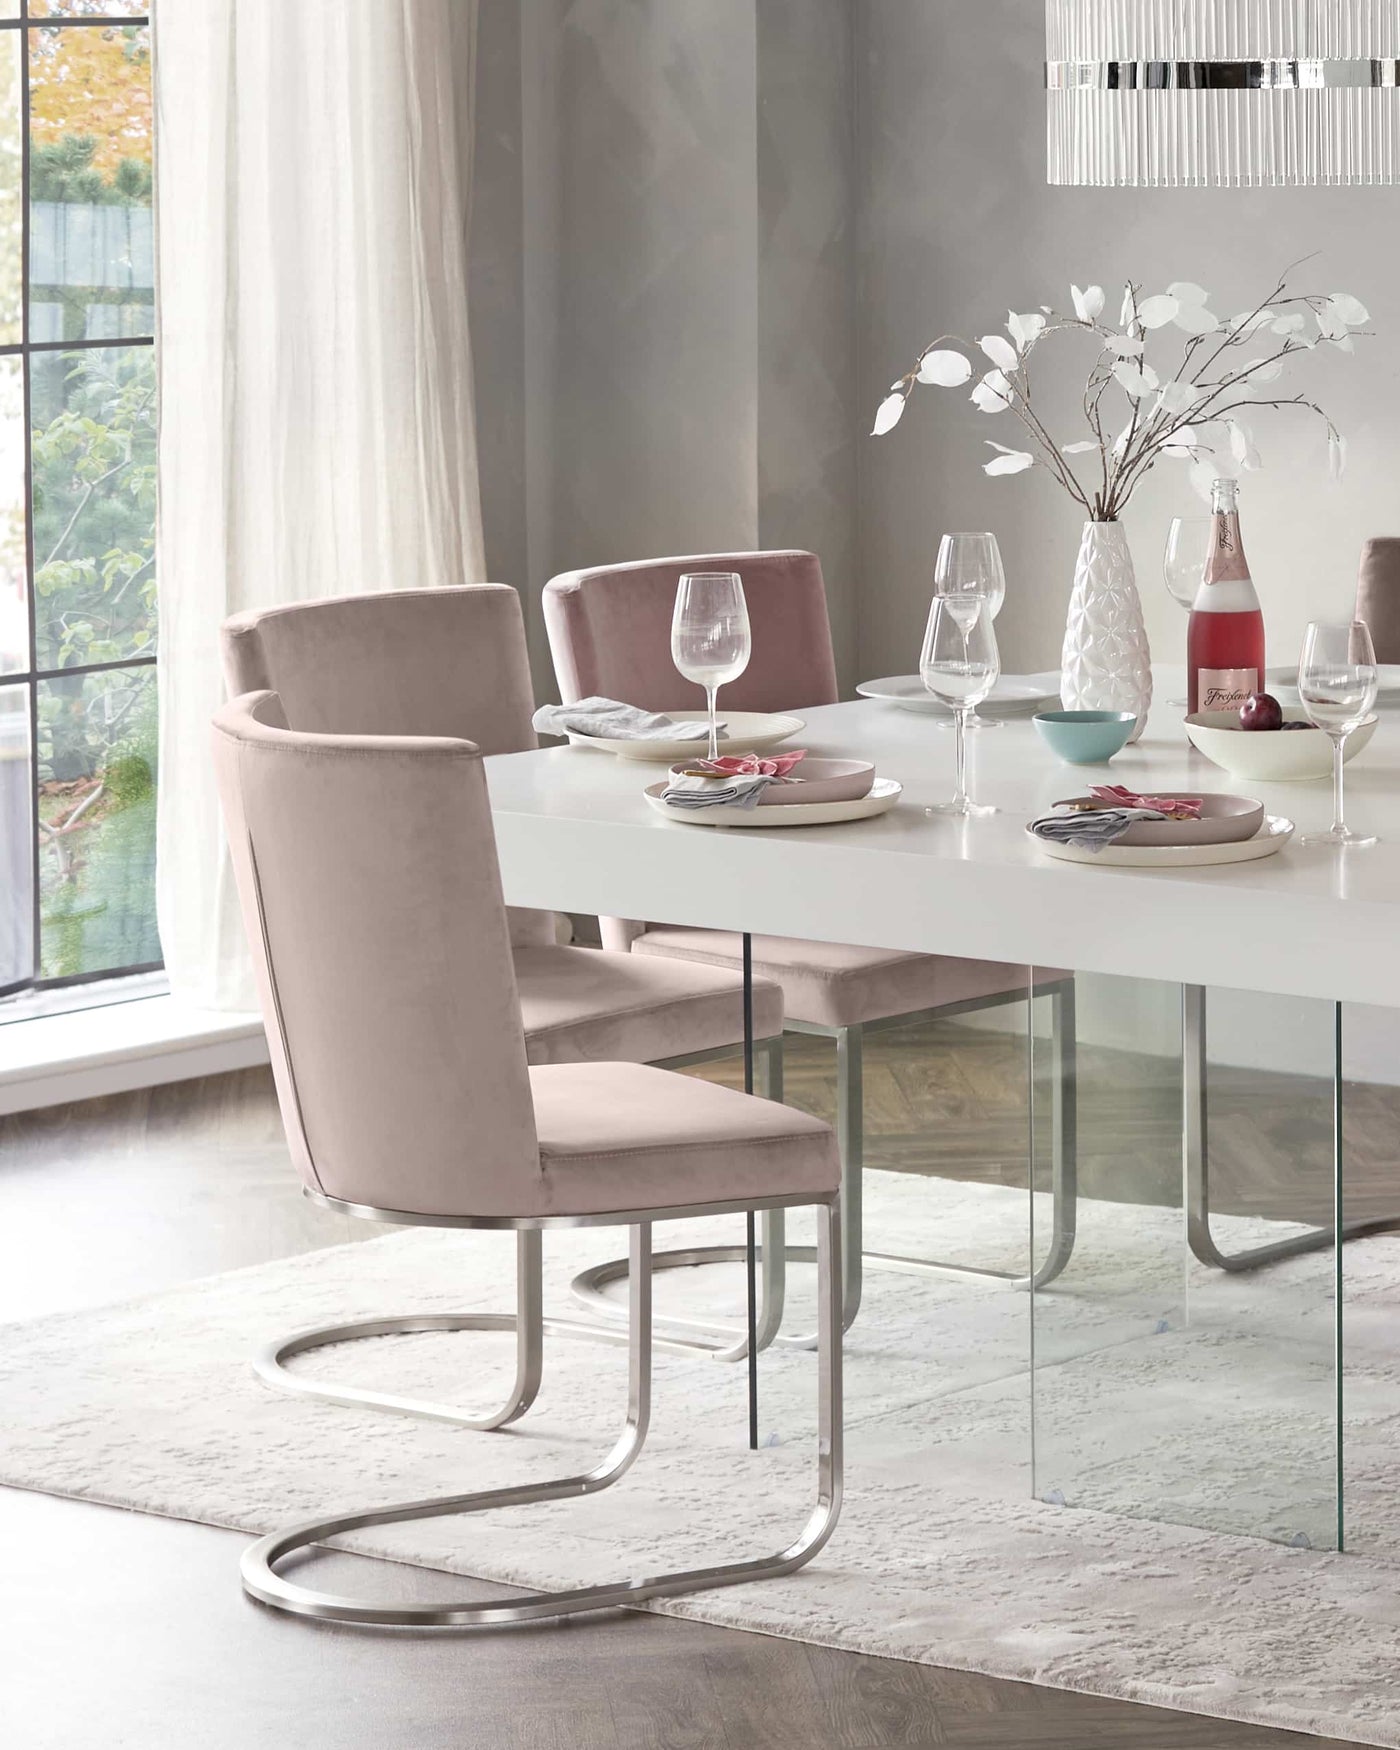 Modern dining room furniture featuring a sleek, rectangular glass-top table with a minimalist white base. The table is surrounded by elegant blush-pink upholstered dining chairs with a smooth, curved backrest and comfortable seating, all supported by stylish metallic silver cantilevered frames. The setting conveys a contemporary yet inviting atmosphere.